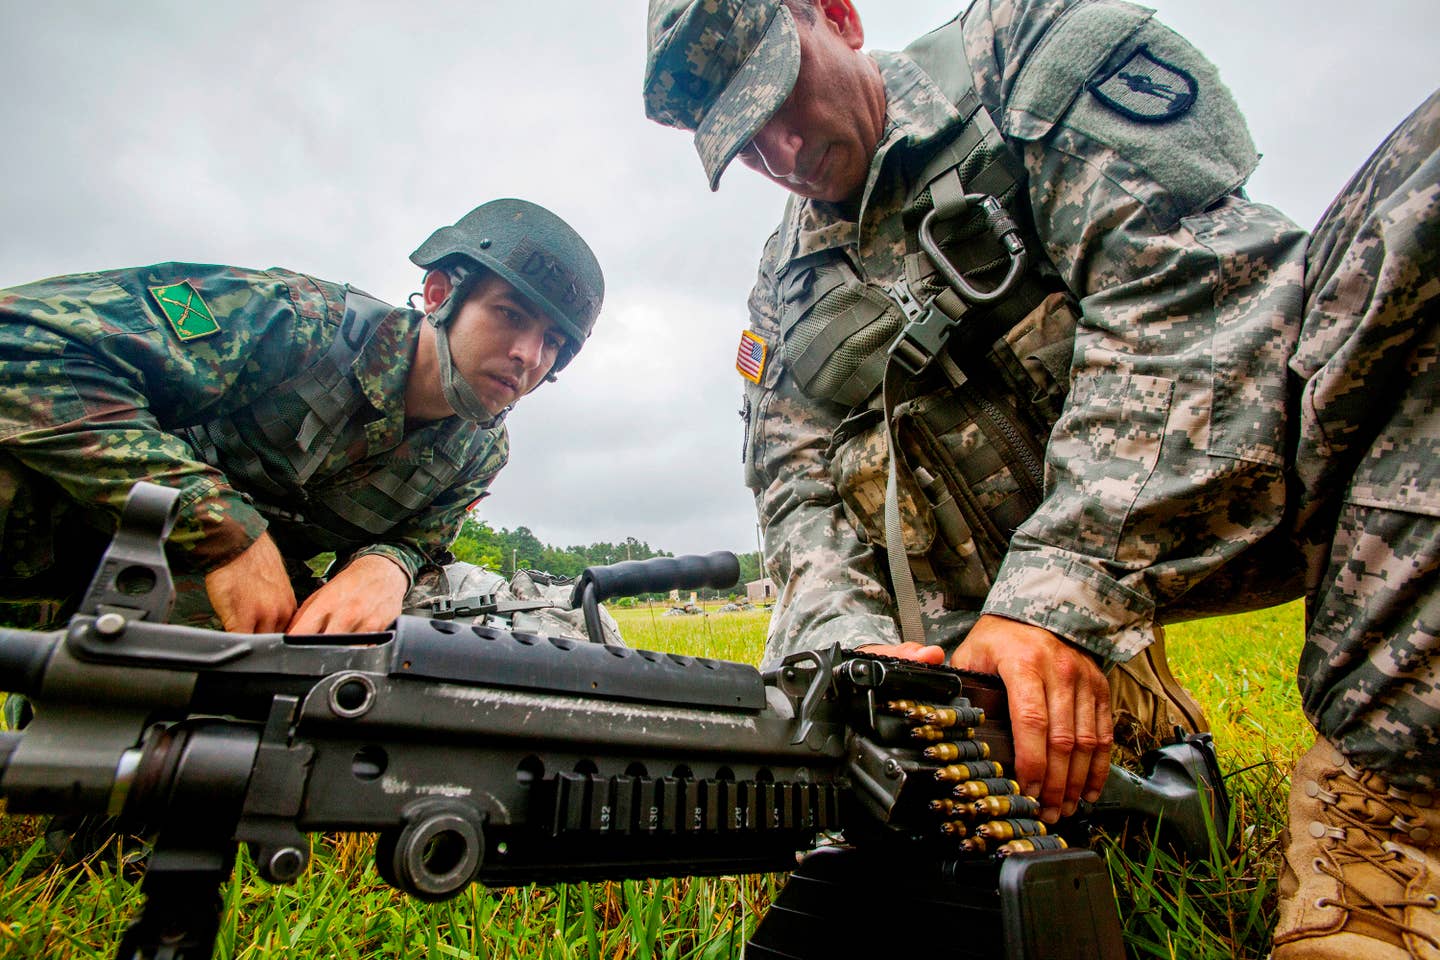 Sgt. 1st Class Harry R. Martinez, right, with the New Jersey Army National Guard, demonstrates how to load an ammunition drum on a M249 squad automatic weapon to Albanian Officer Candidate Endri Deda while training at Joint Base McGuire-Dix-Lakehurst, N.J.